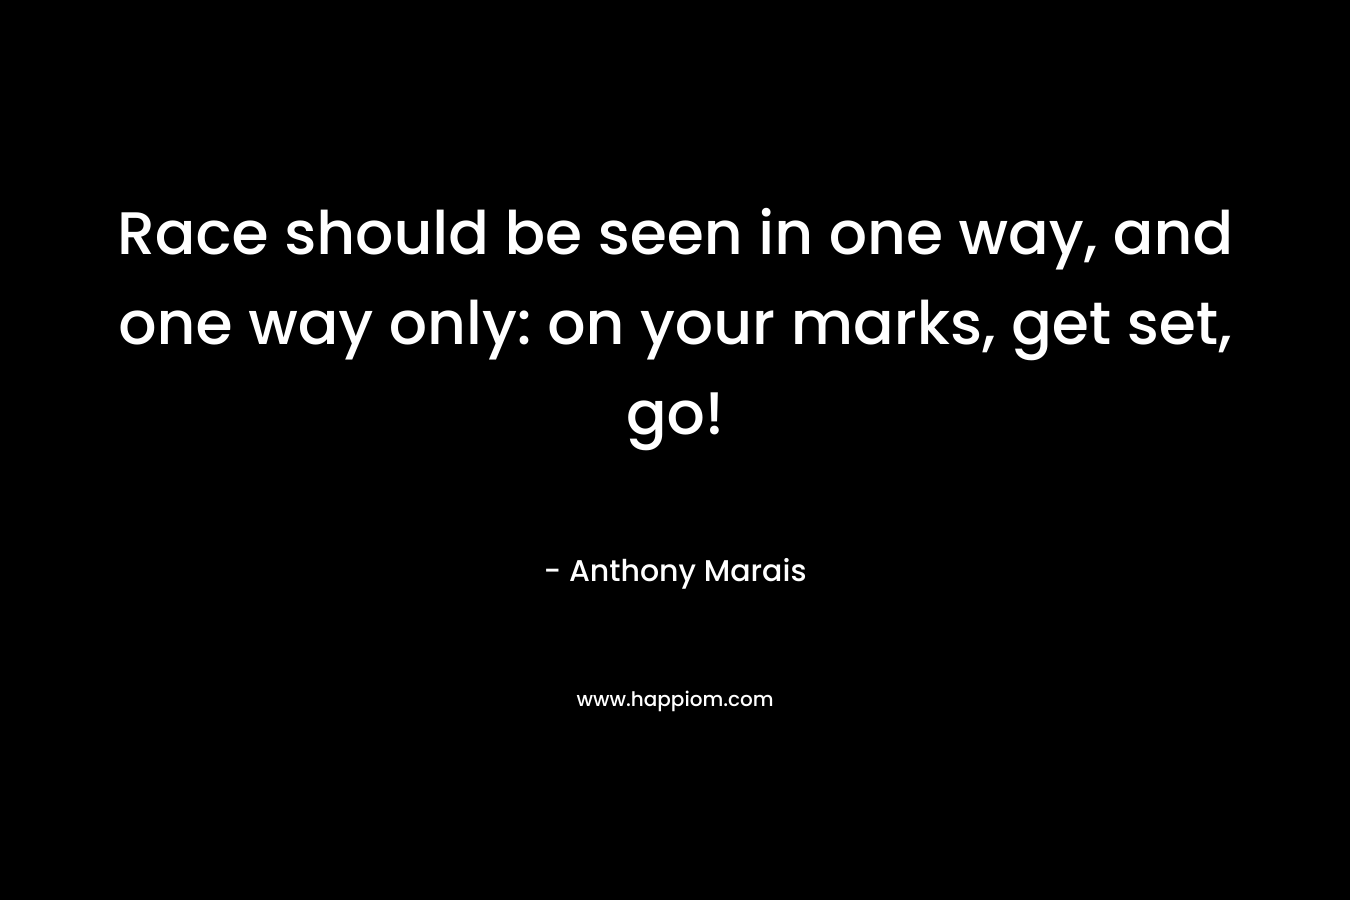 Race should be seen in one way, and one way only: on your marks, get set, go! – Anthony Marais